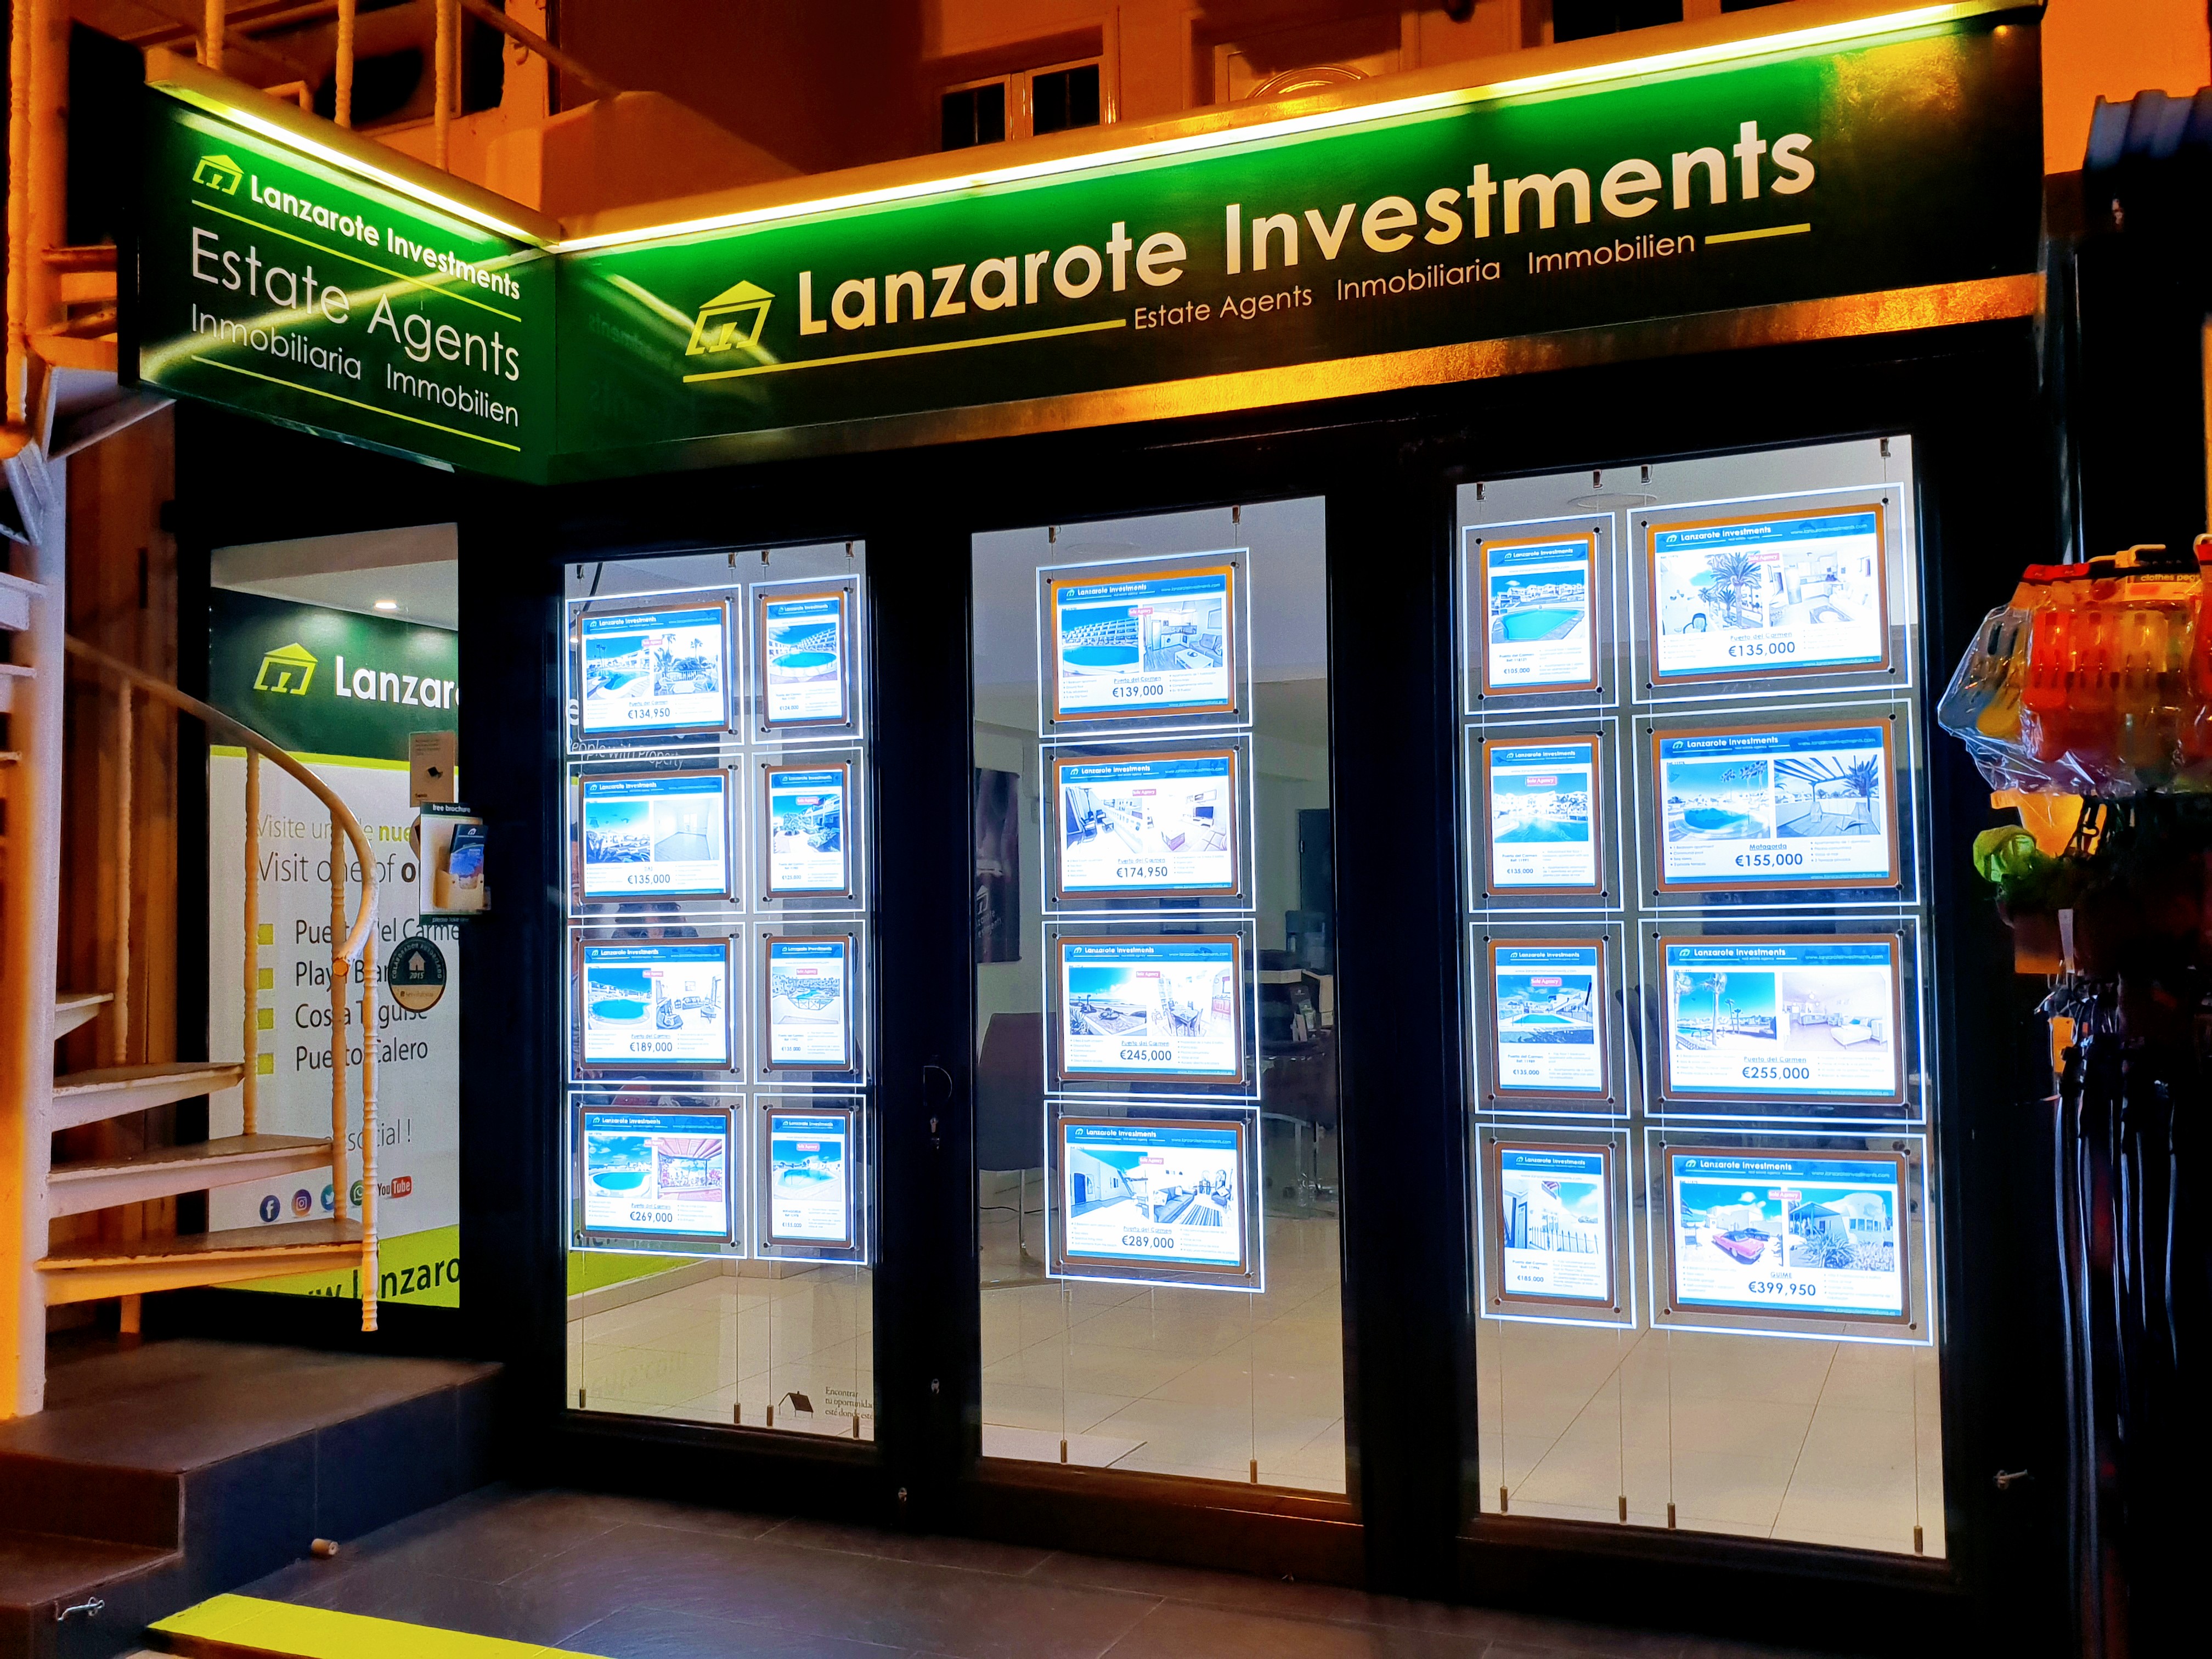 Contact Lanzarote Investments